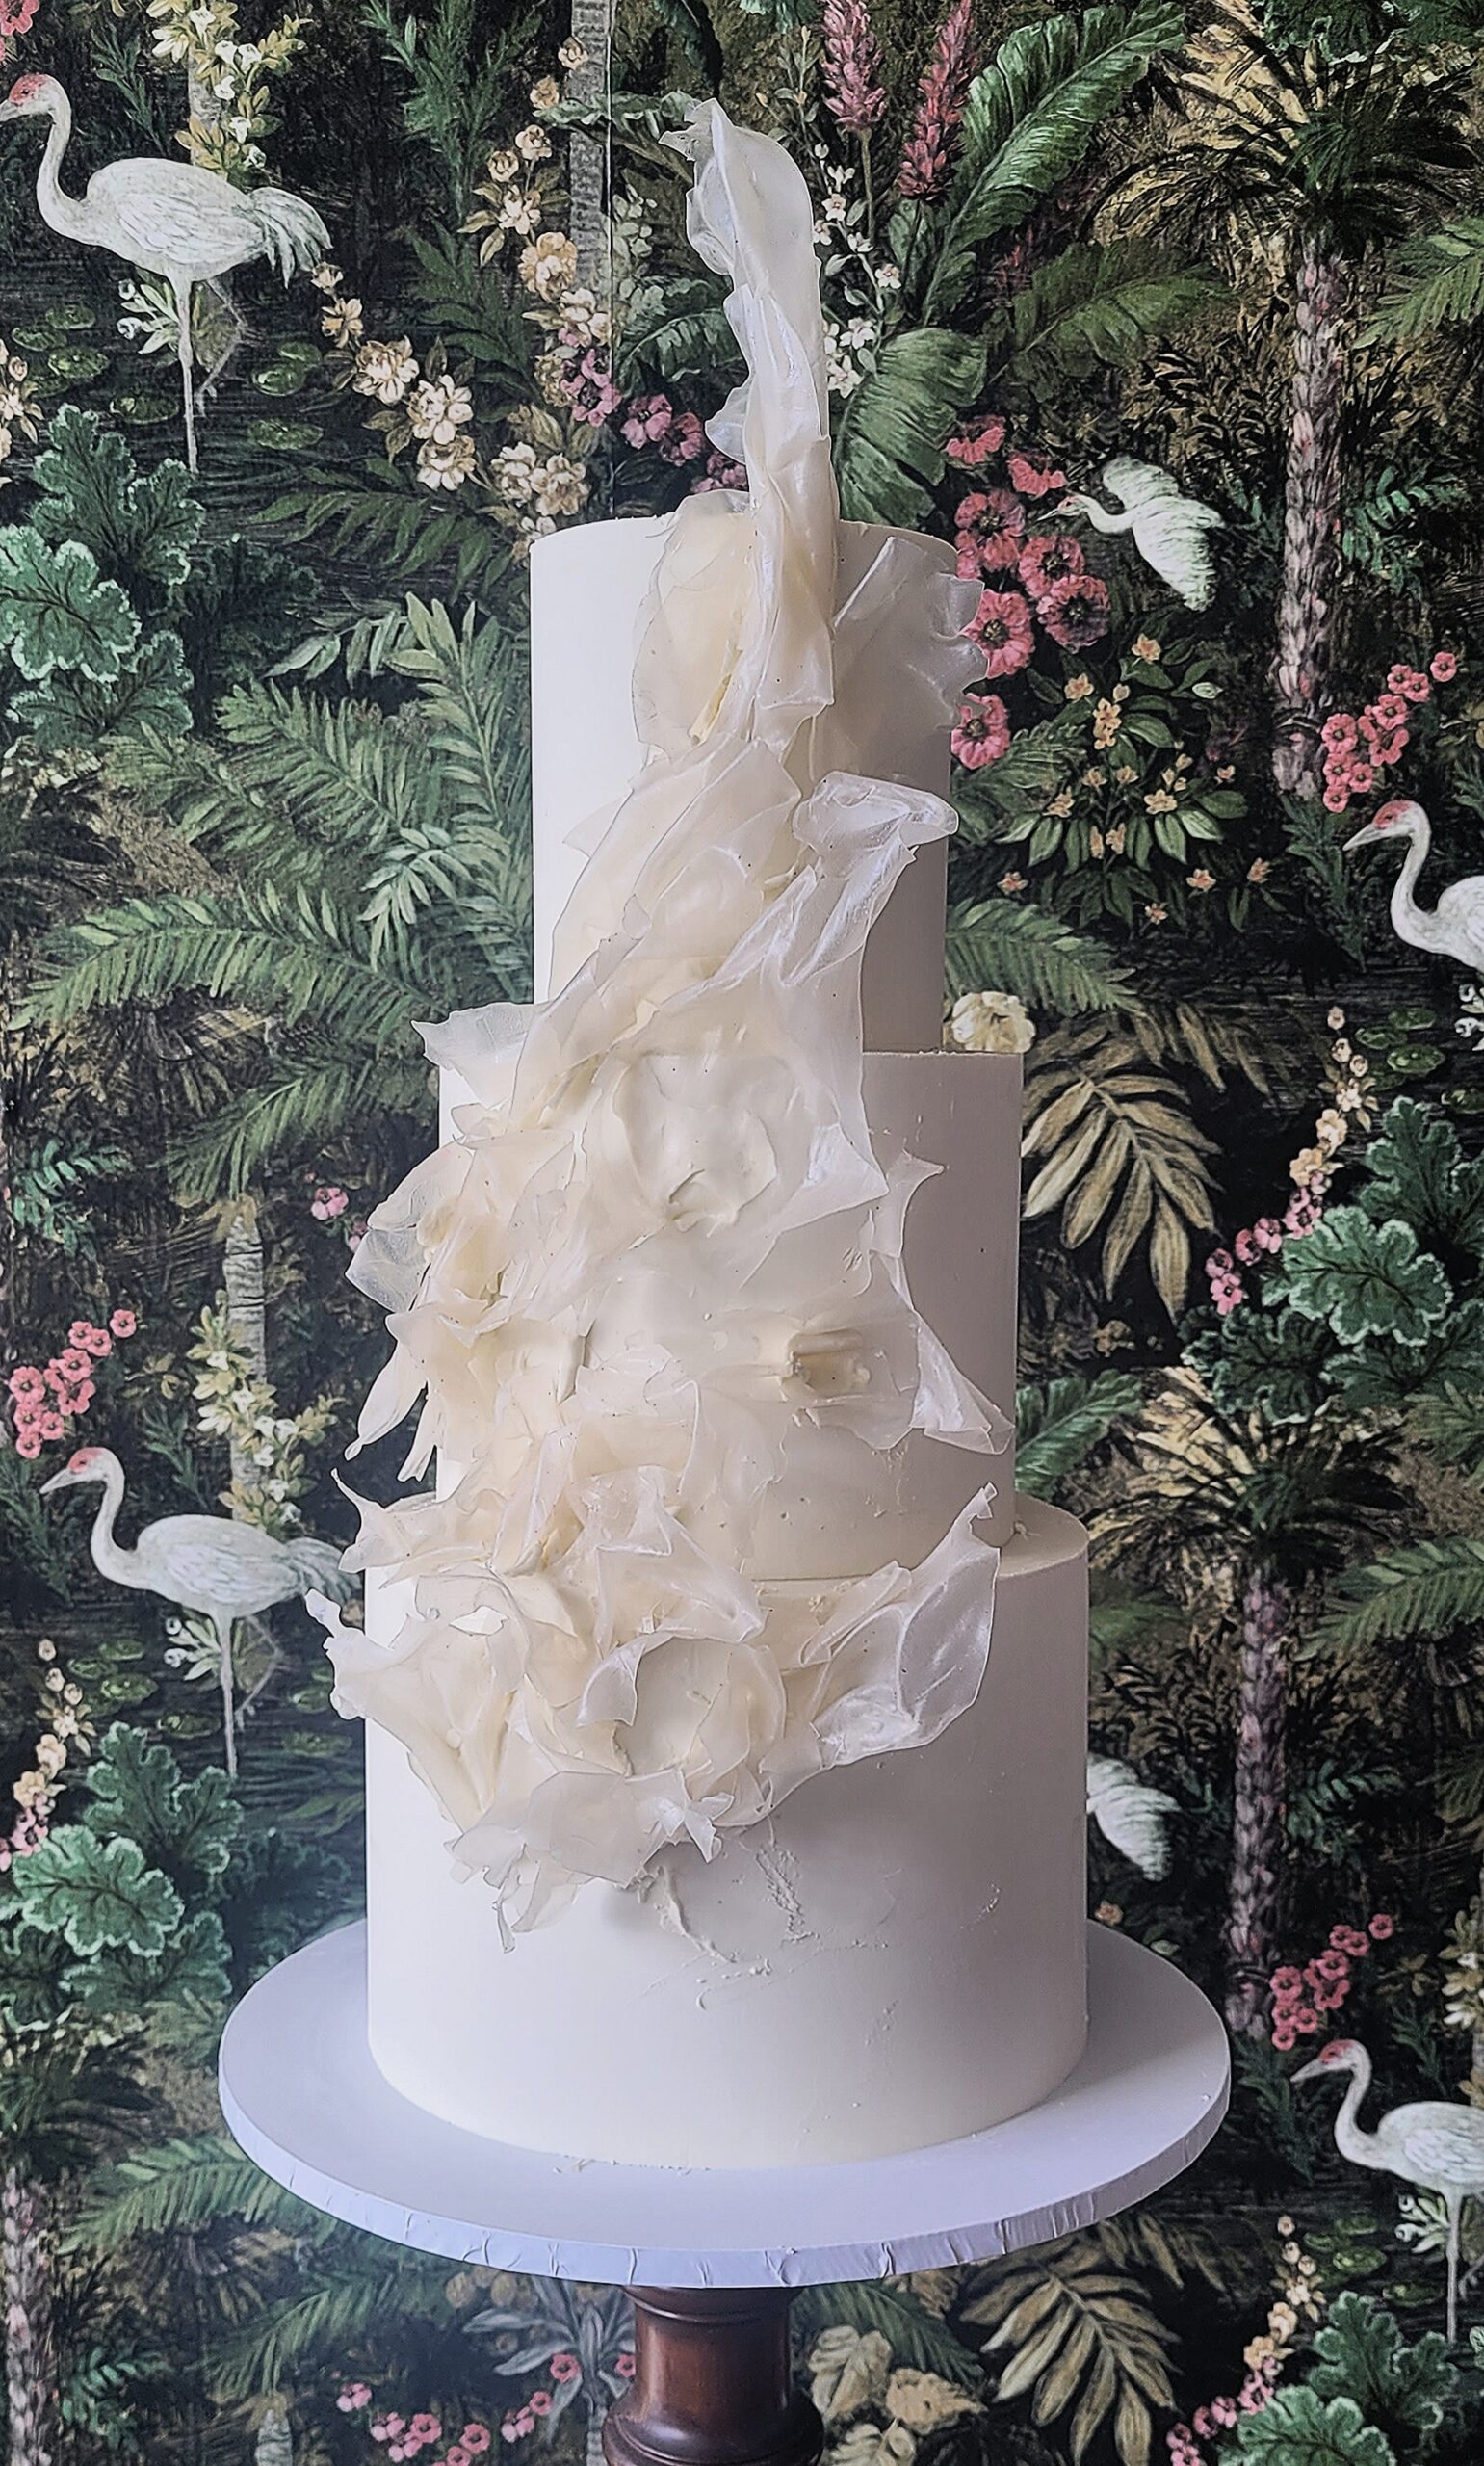 8x4-6x4-4x4-Wedding-cake-with-rice-paper-sails-The-Cake-Eating-Co-Christchurch